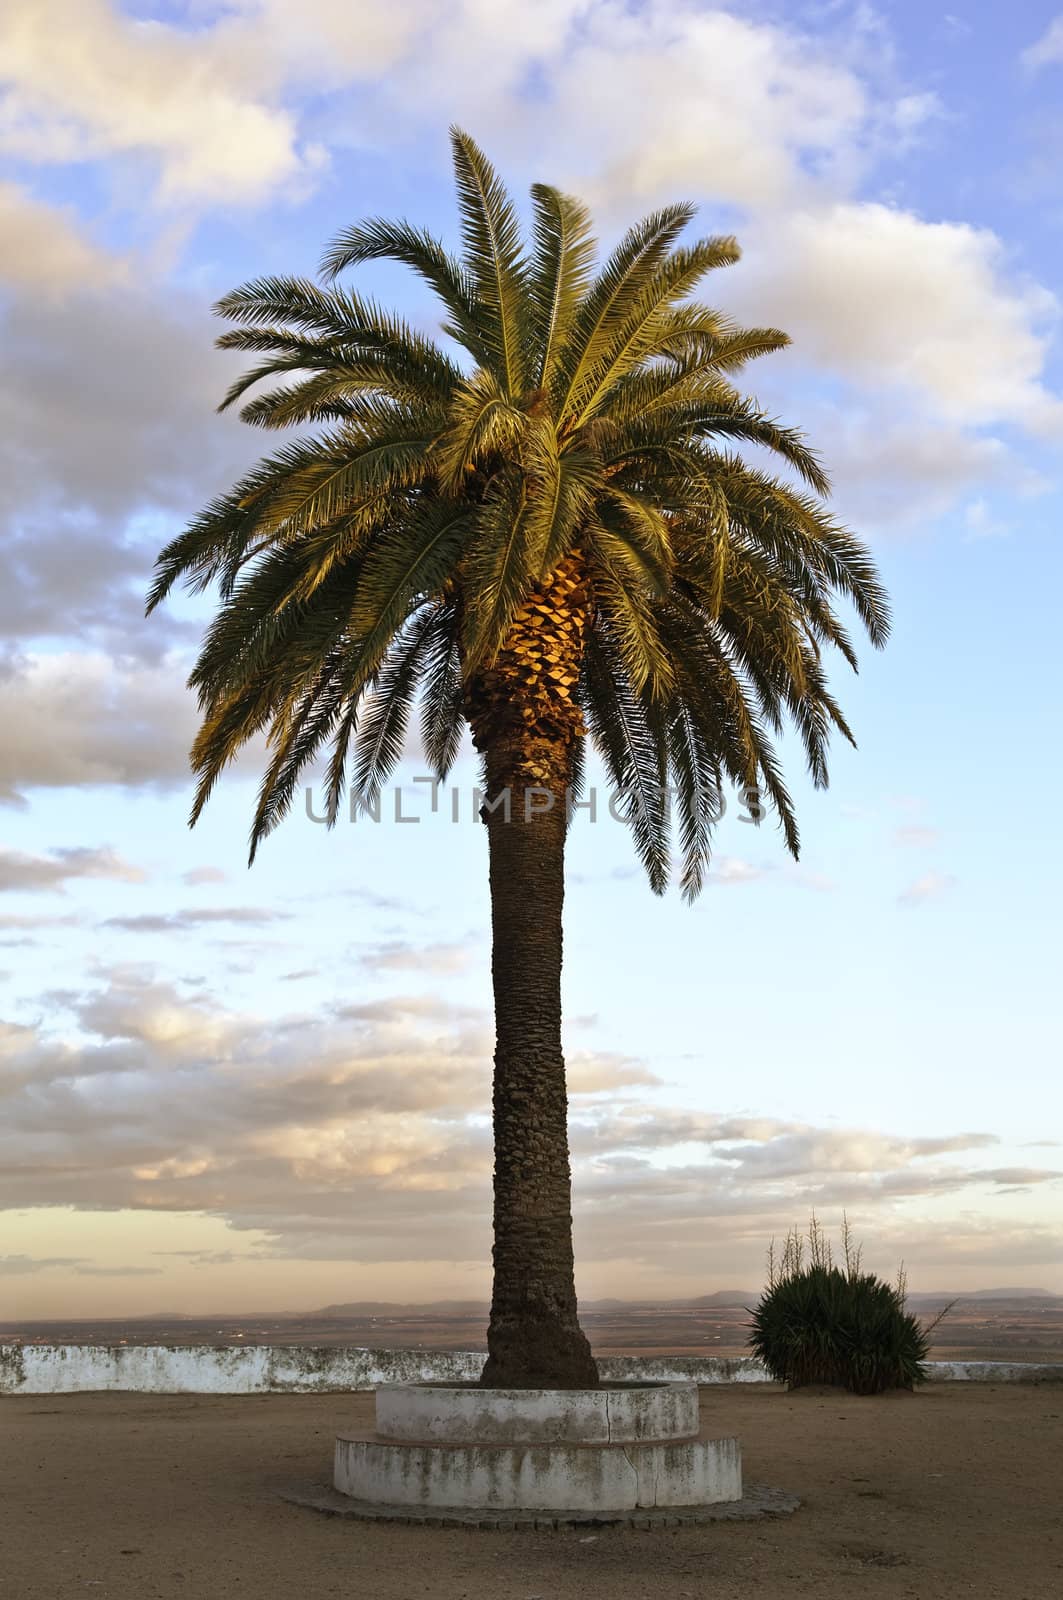 Lone palm tree against a beautiful cloudy sky
